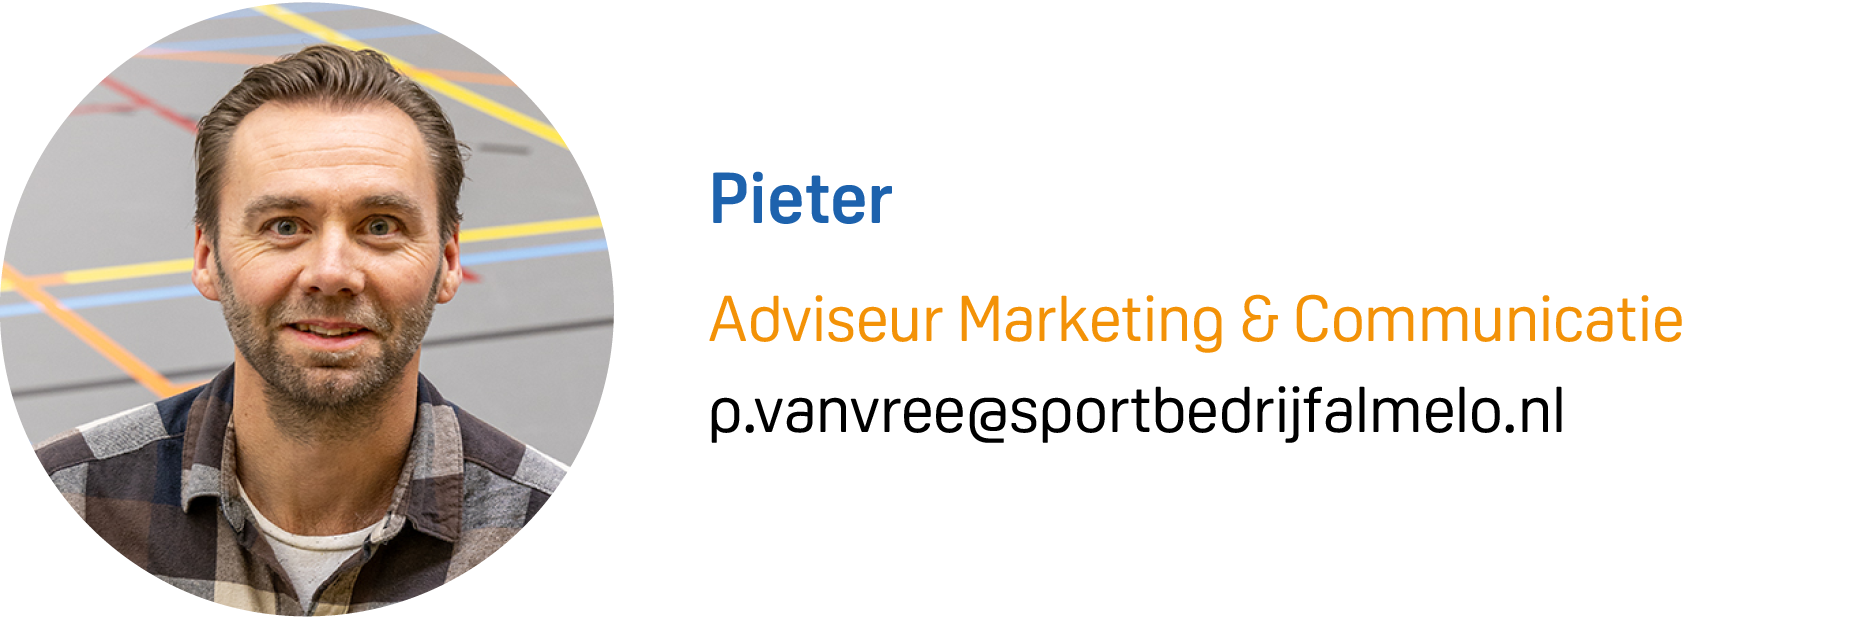 Pieter Visite MAIL.png